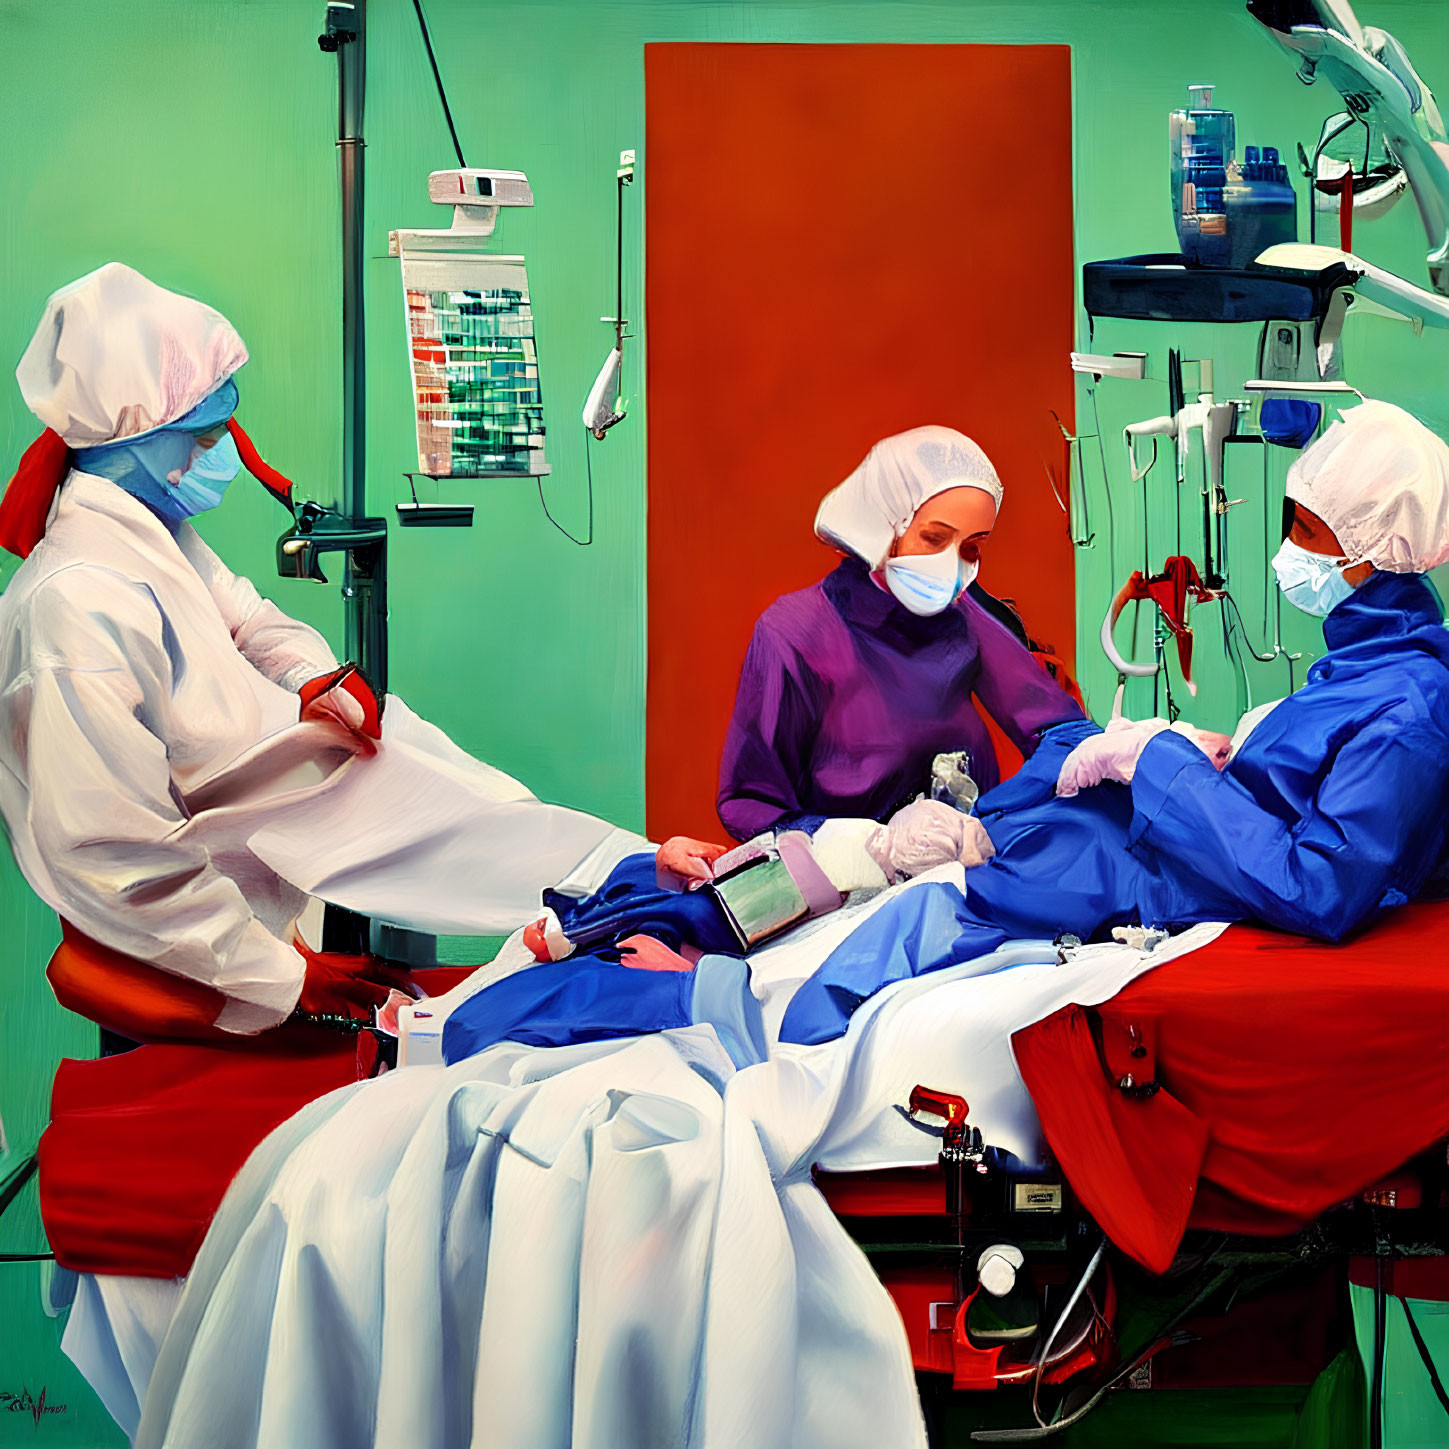 Medical professionals in scrubs and masks attending to patient on operating table